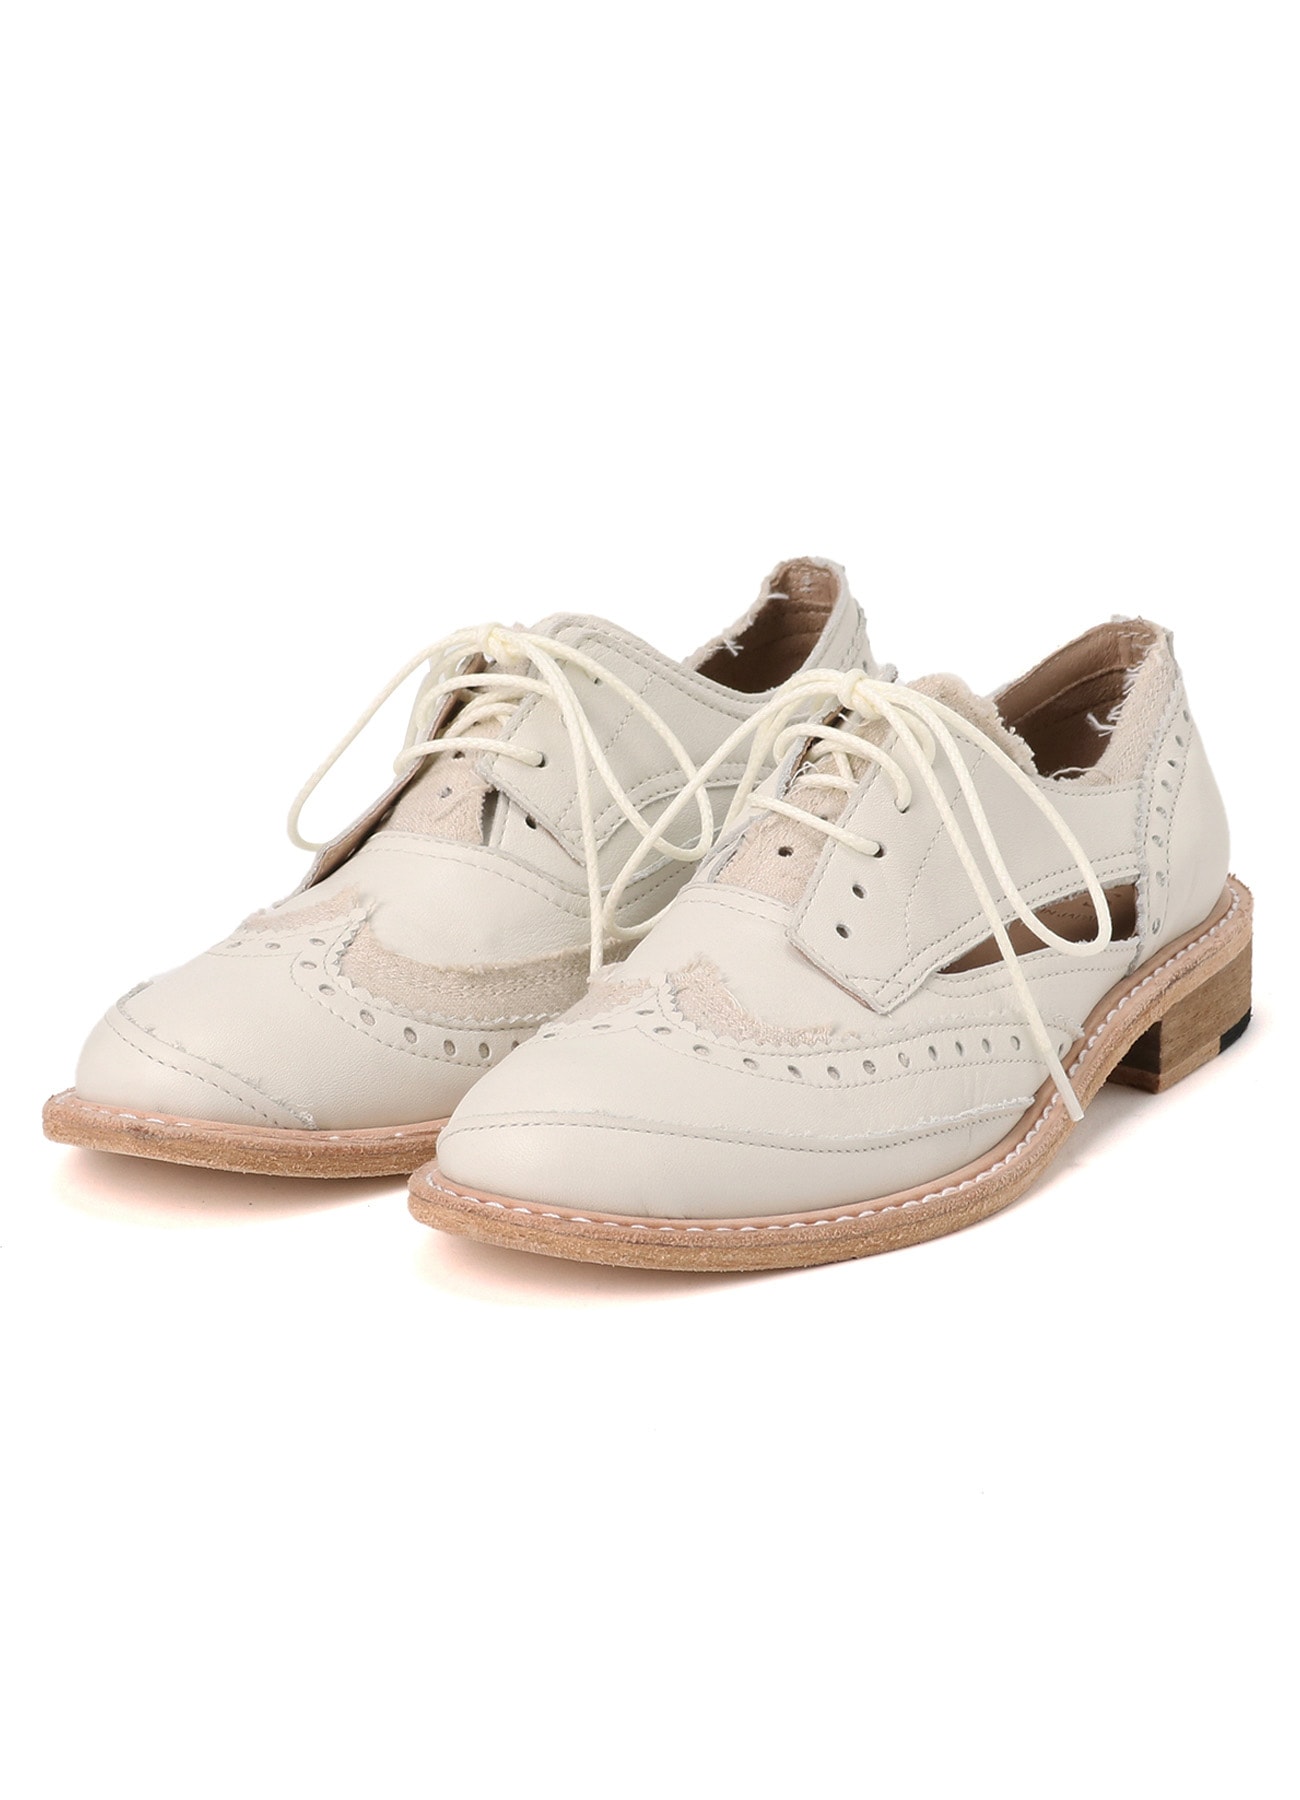 COTTON LINEN/LEATHER COMBINATION WING CHIP SHOES